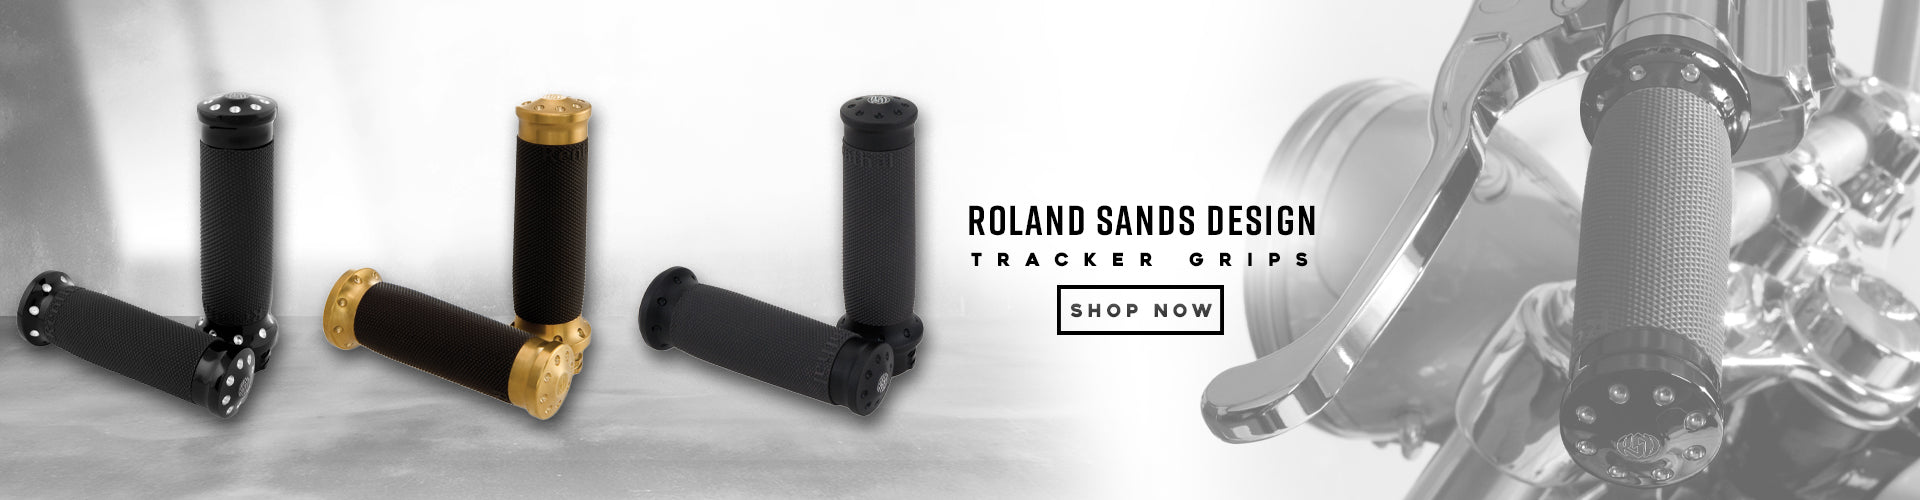 graphic banner of rsd tracker grips. 3 sets of grips in different colorways. a contrast cut finish, bronze and black ops. on the right there is an onbike photo of the brips